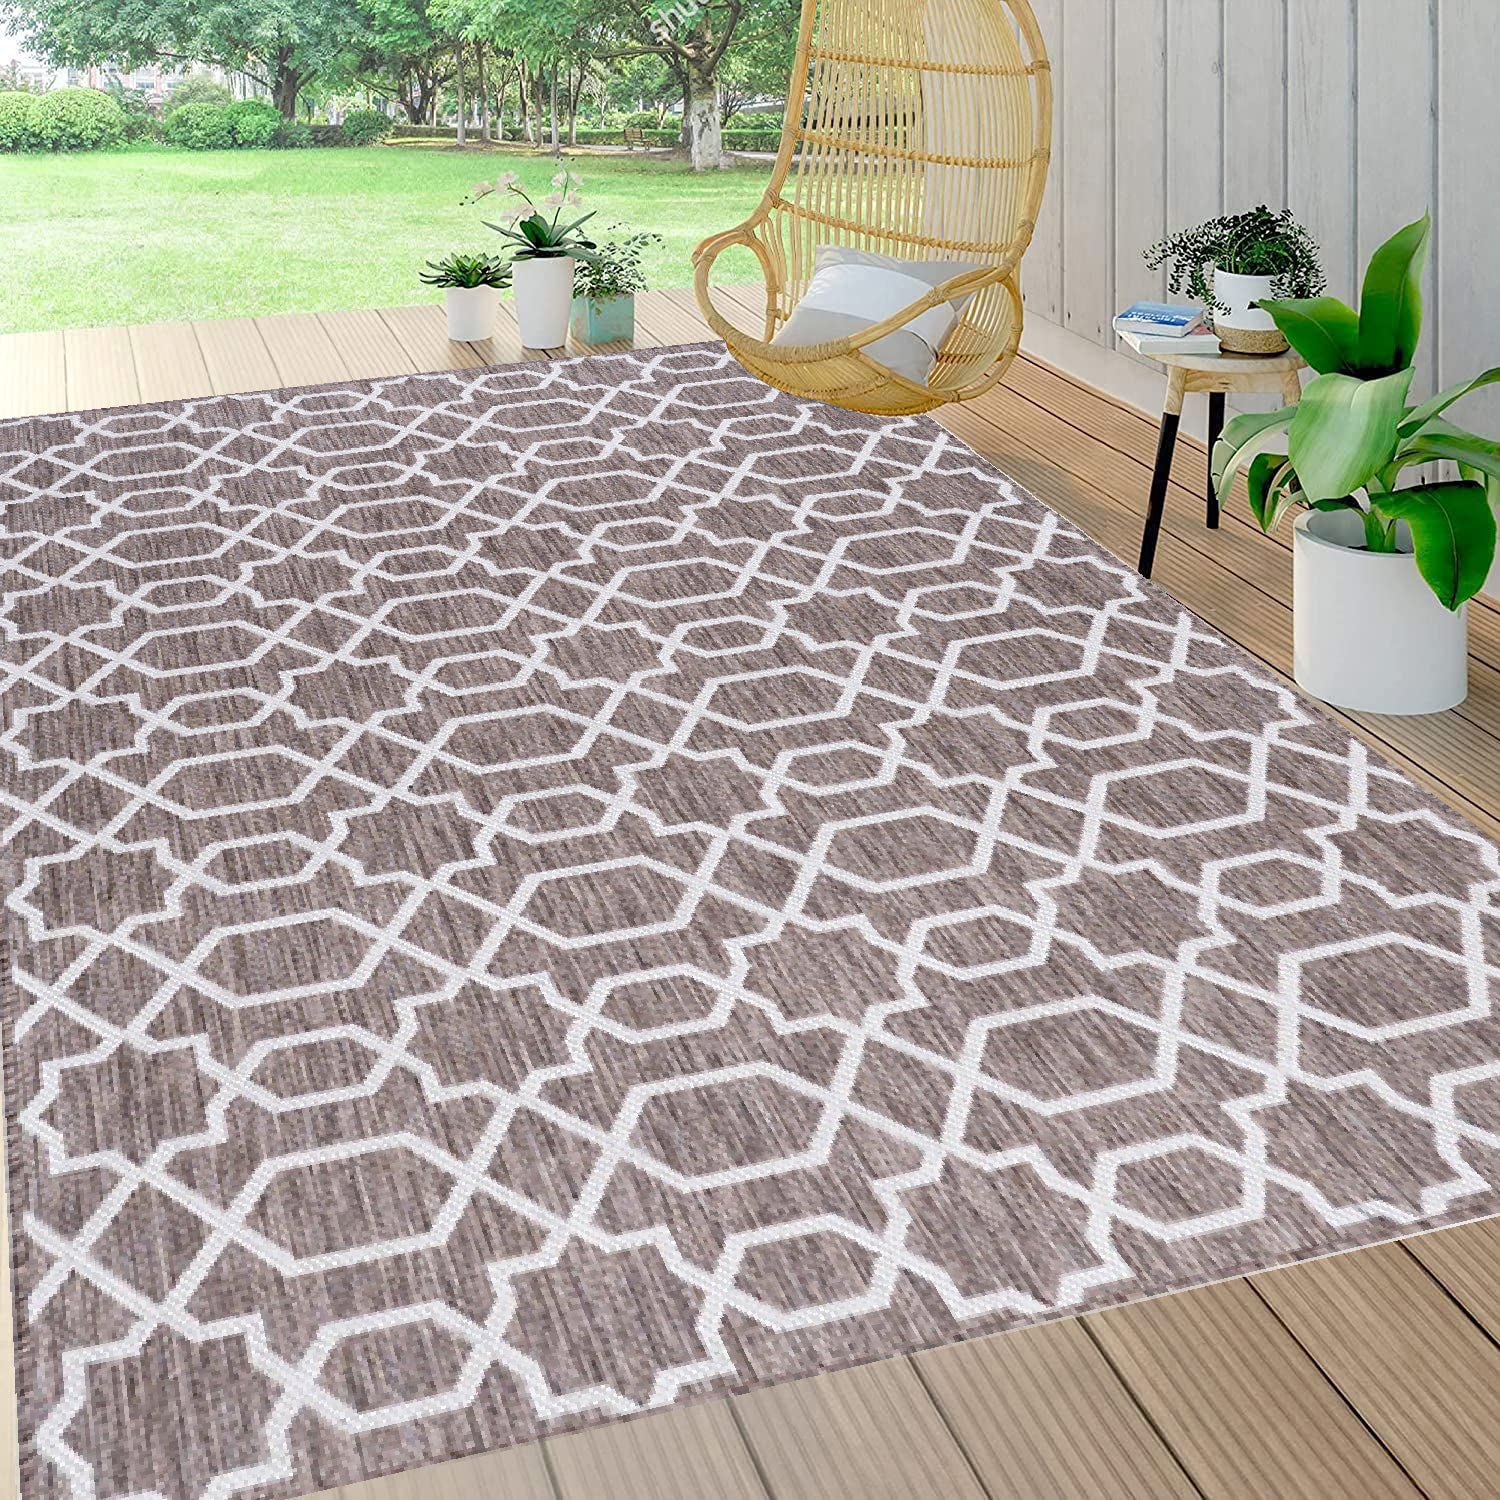 Outdoor Rug for Patio, Deck, Backyard KGORGE Store